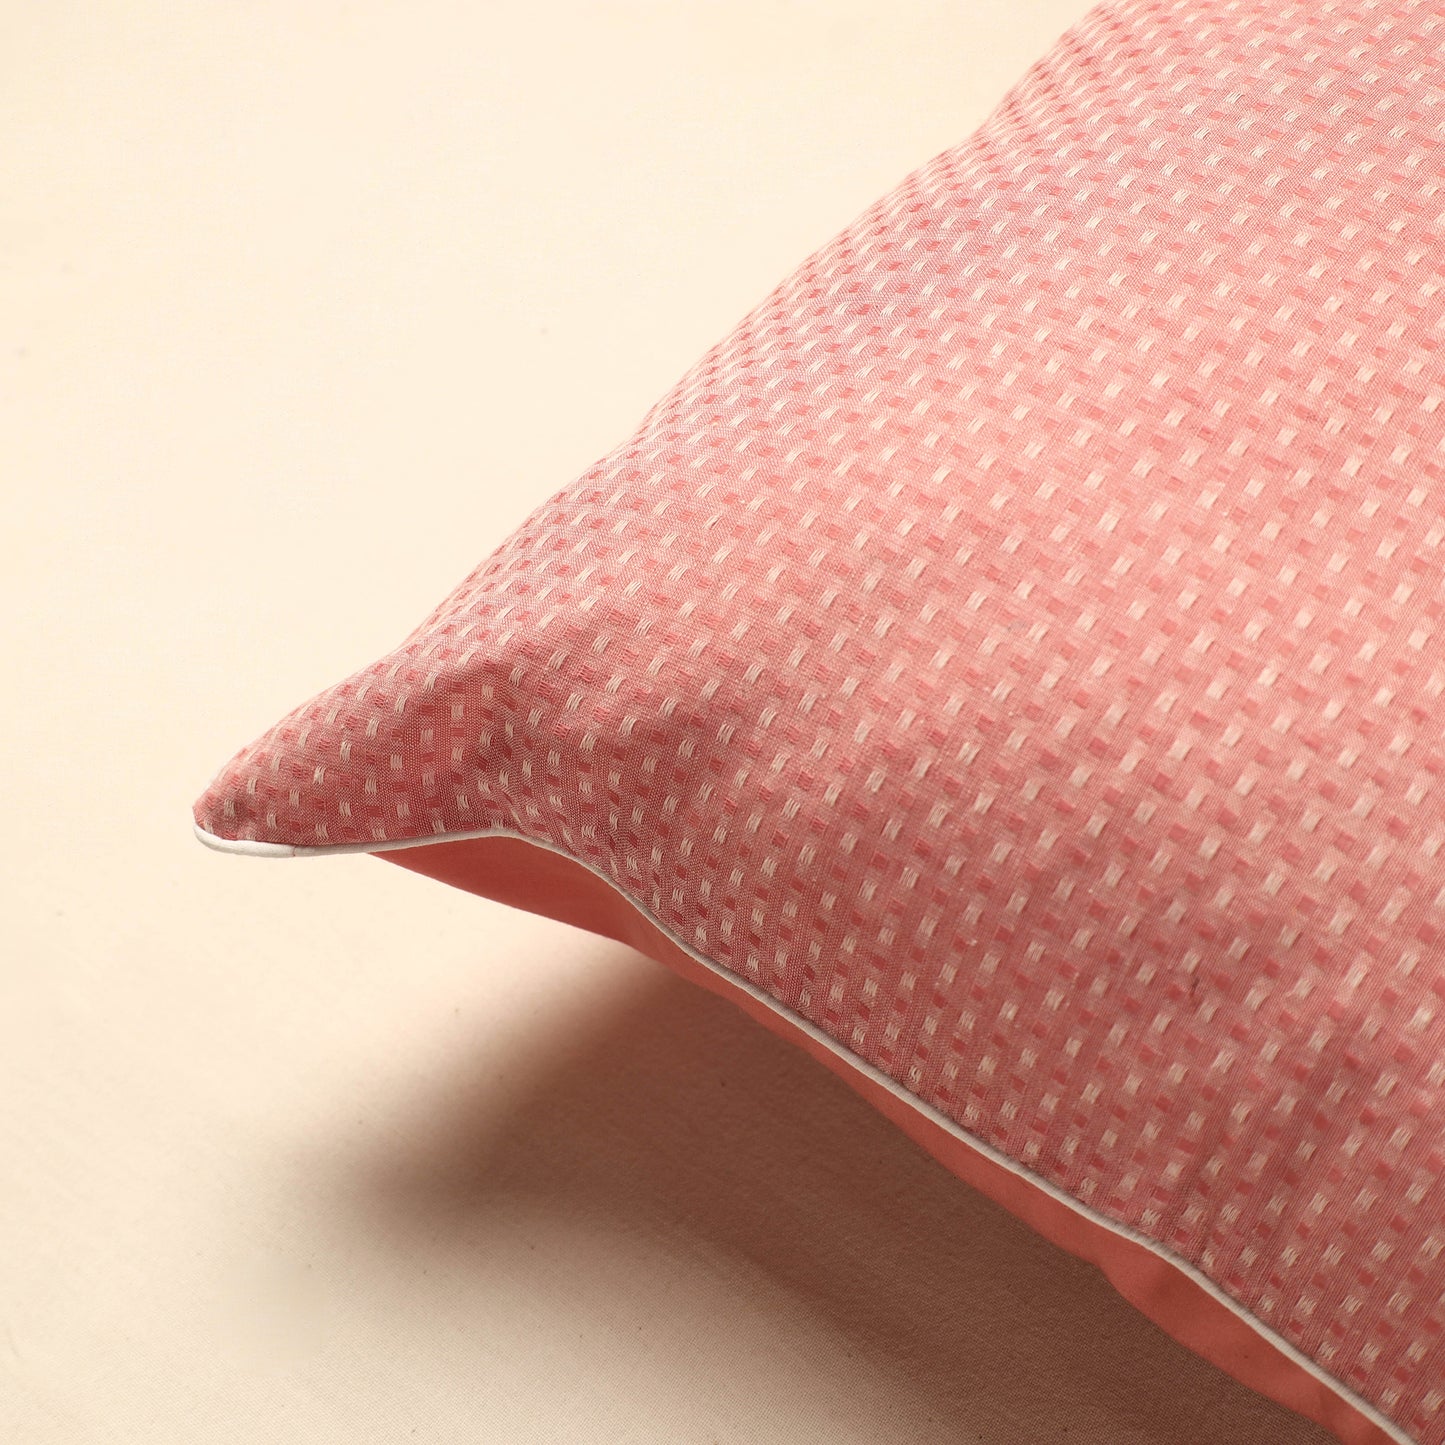 Pink - Jacquard Cotton Cushion Cover (16 x 16 in)